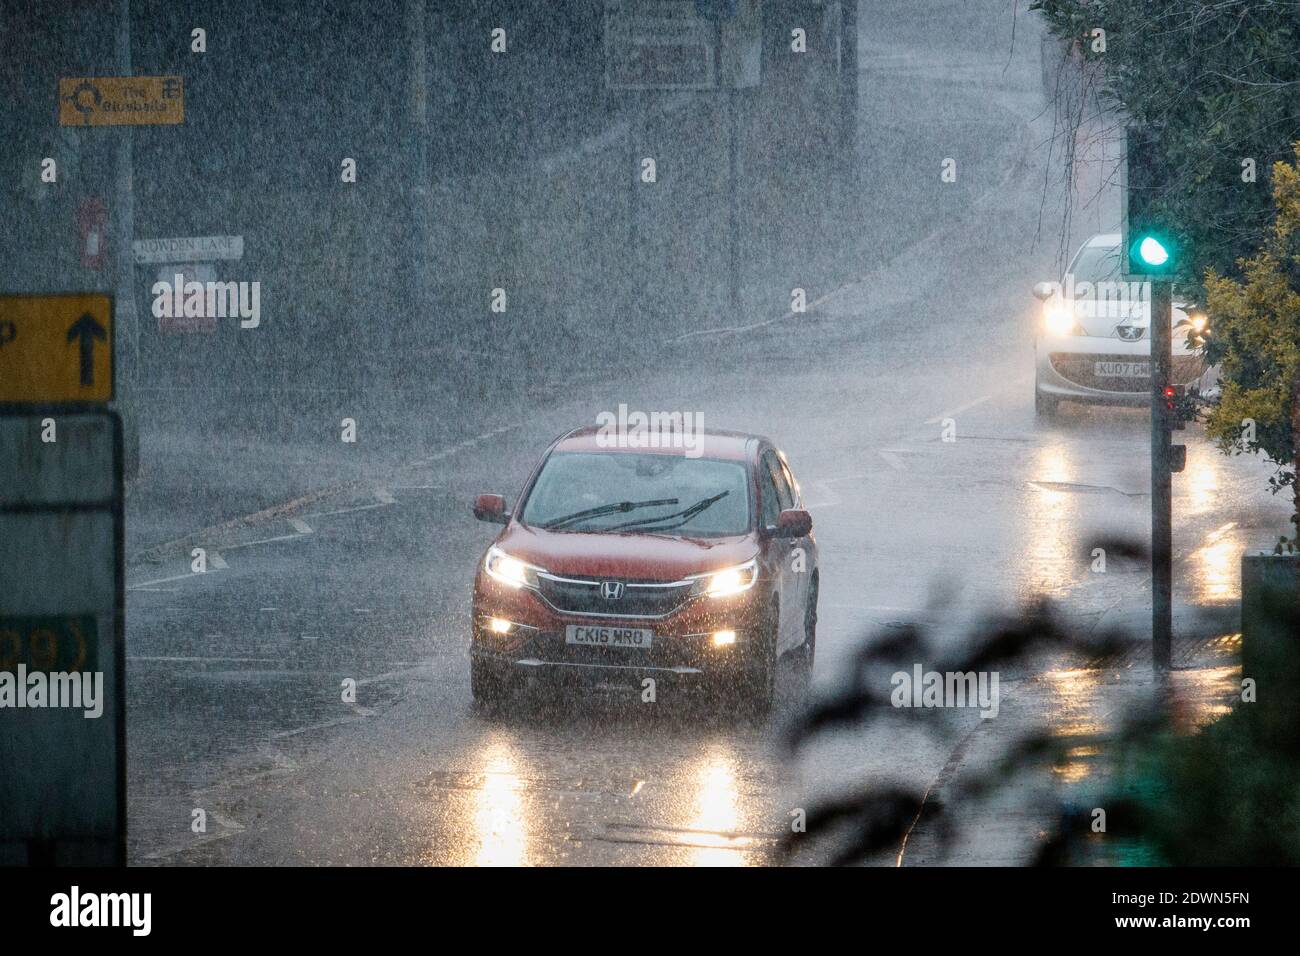 Chippenham, Wiltshire, UK. 23rd December, 2020. As torrential showers affect many parts of the UK, drivers are pictured braving very heavy rain in Chippenham. Credit: Lynchpics/Alamy Live News Stock Photo